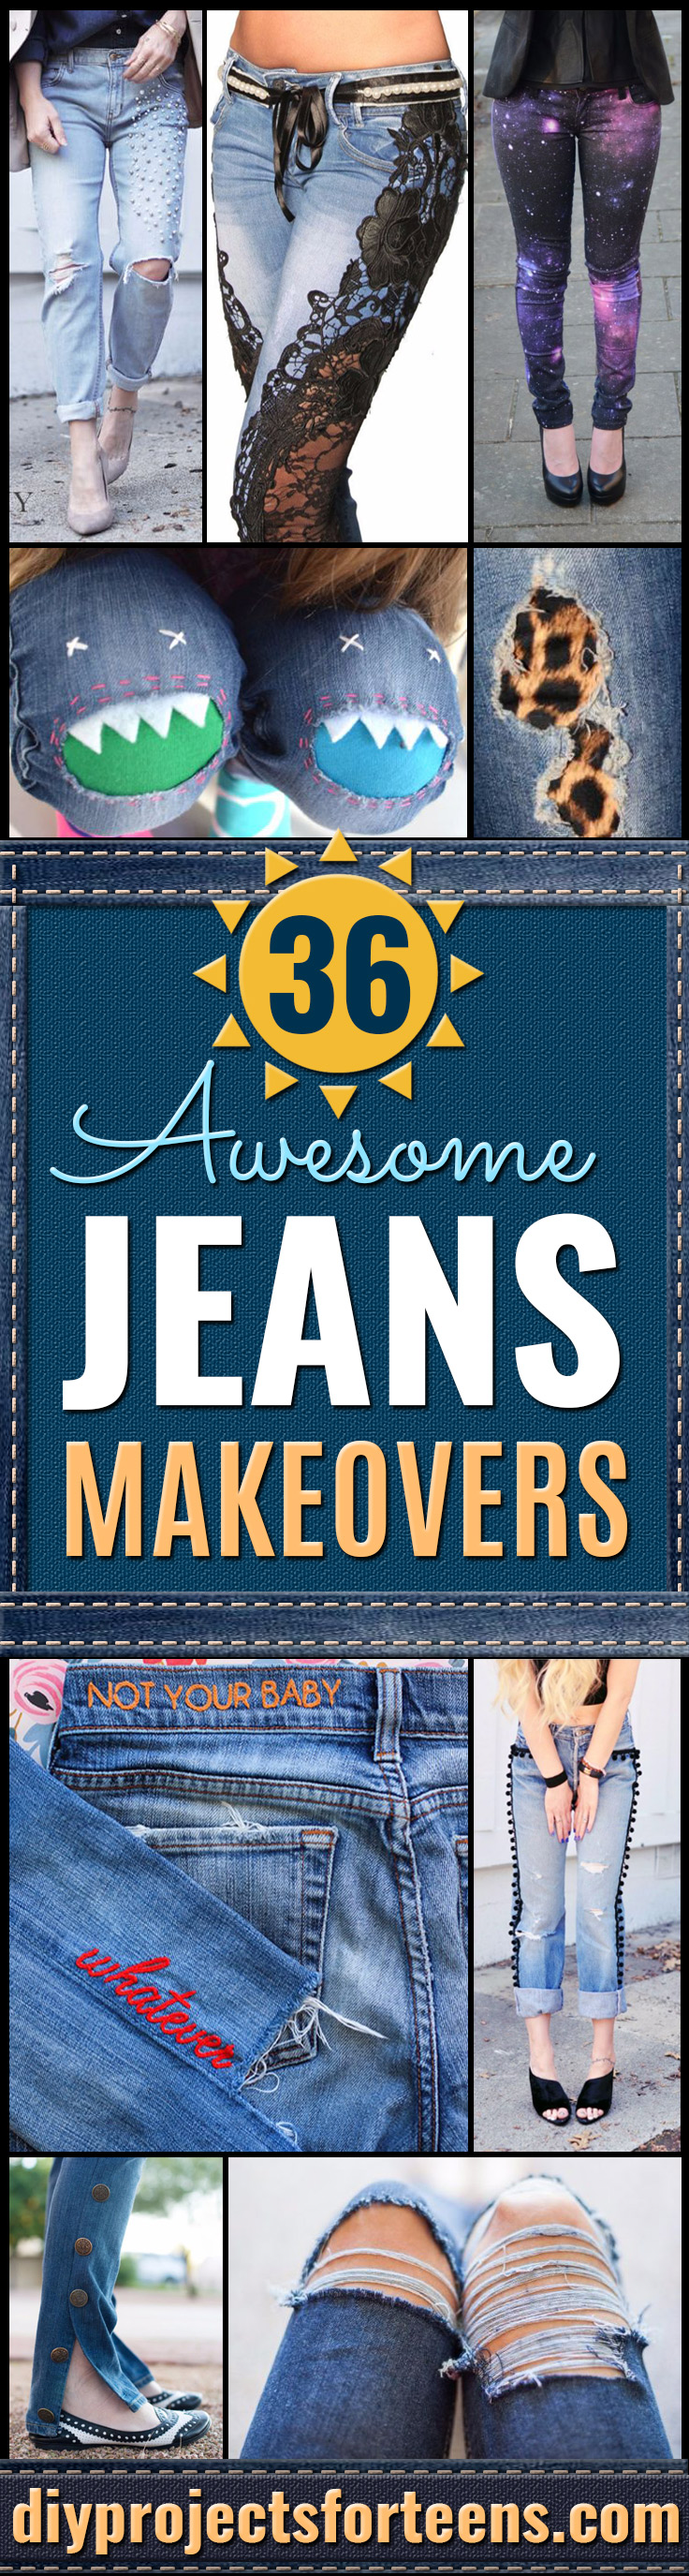 DIY Jeans Makeovers - Easy Crafts and Tutorials to Refashion and Upcycle Your Jeans and Create Ripped, Distressed, Bleach, Lace Edge, Cut Off, Skinny, Shorts, Skirts, Galaxy and Painted Jeans Ideas - Cool Denim Fashions for Teens, Teenagers, Women #diyideas #diyclothes #clothinghacks #teencrafts